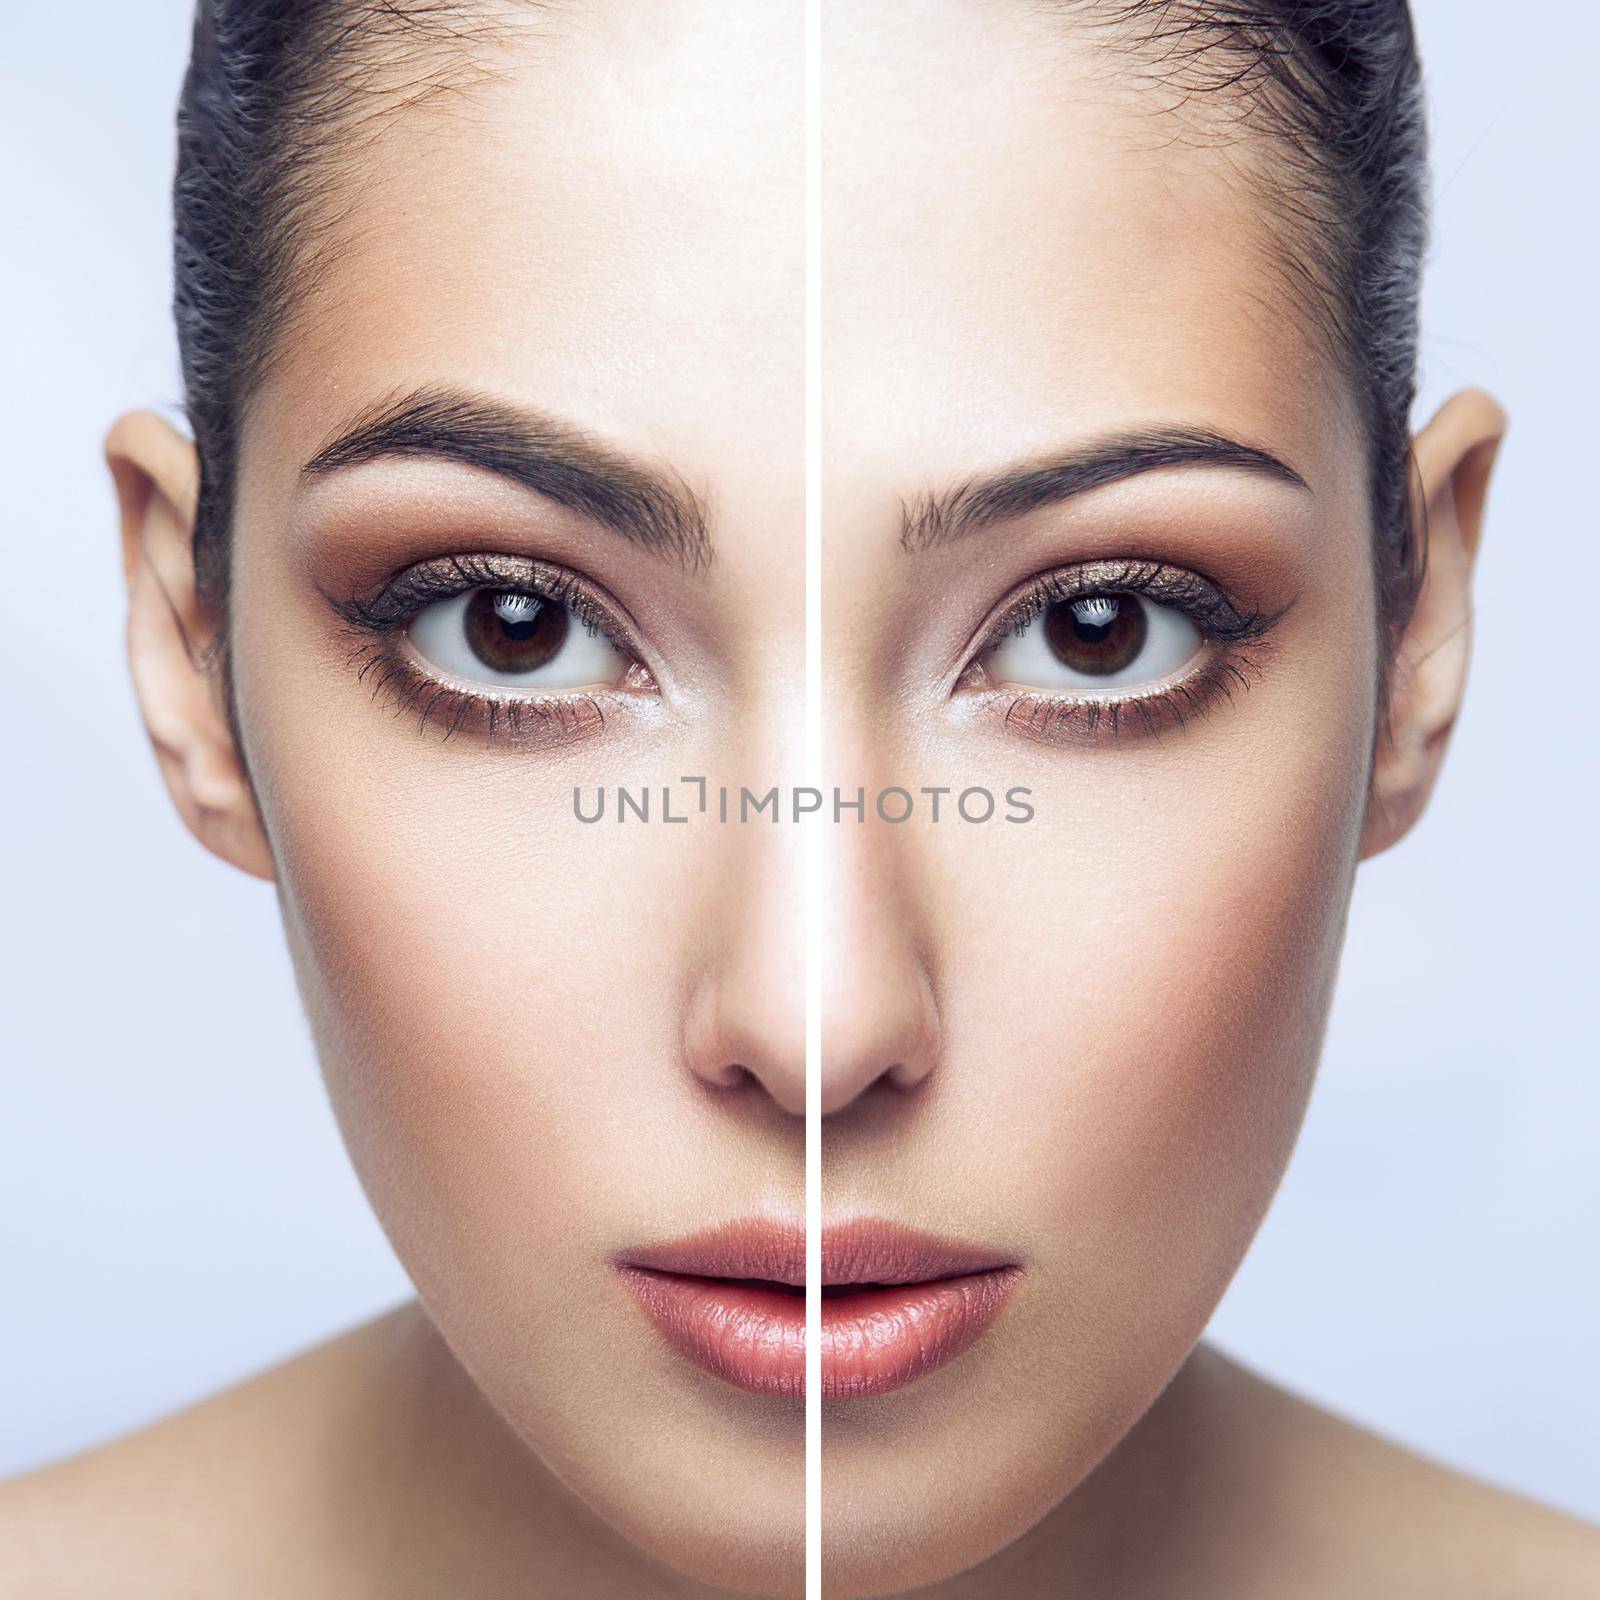 Before and after eyebrows treatment. Closeup half portrait of beautiful brunette woman with thick and thin different eyebrows looking at camera. indoor studio shot, isolated on grey backgrond.